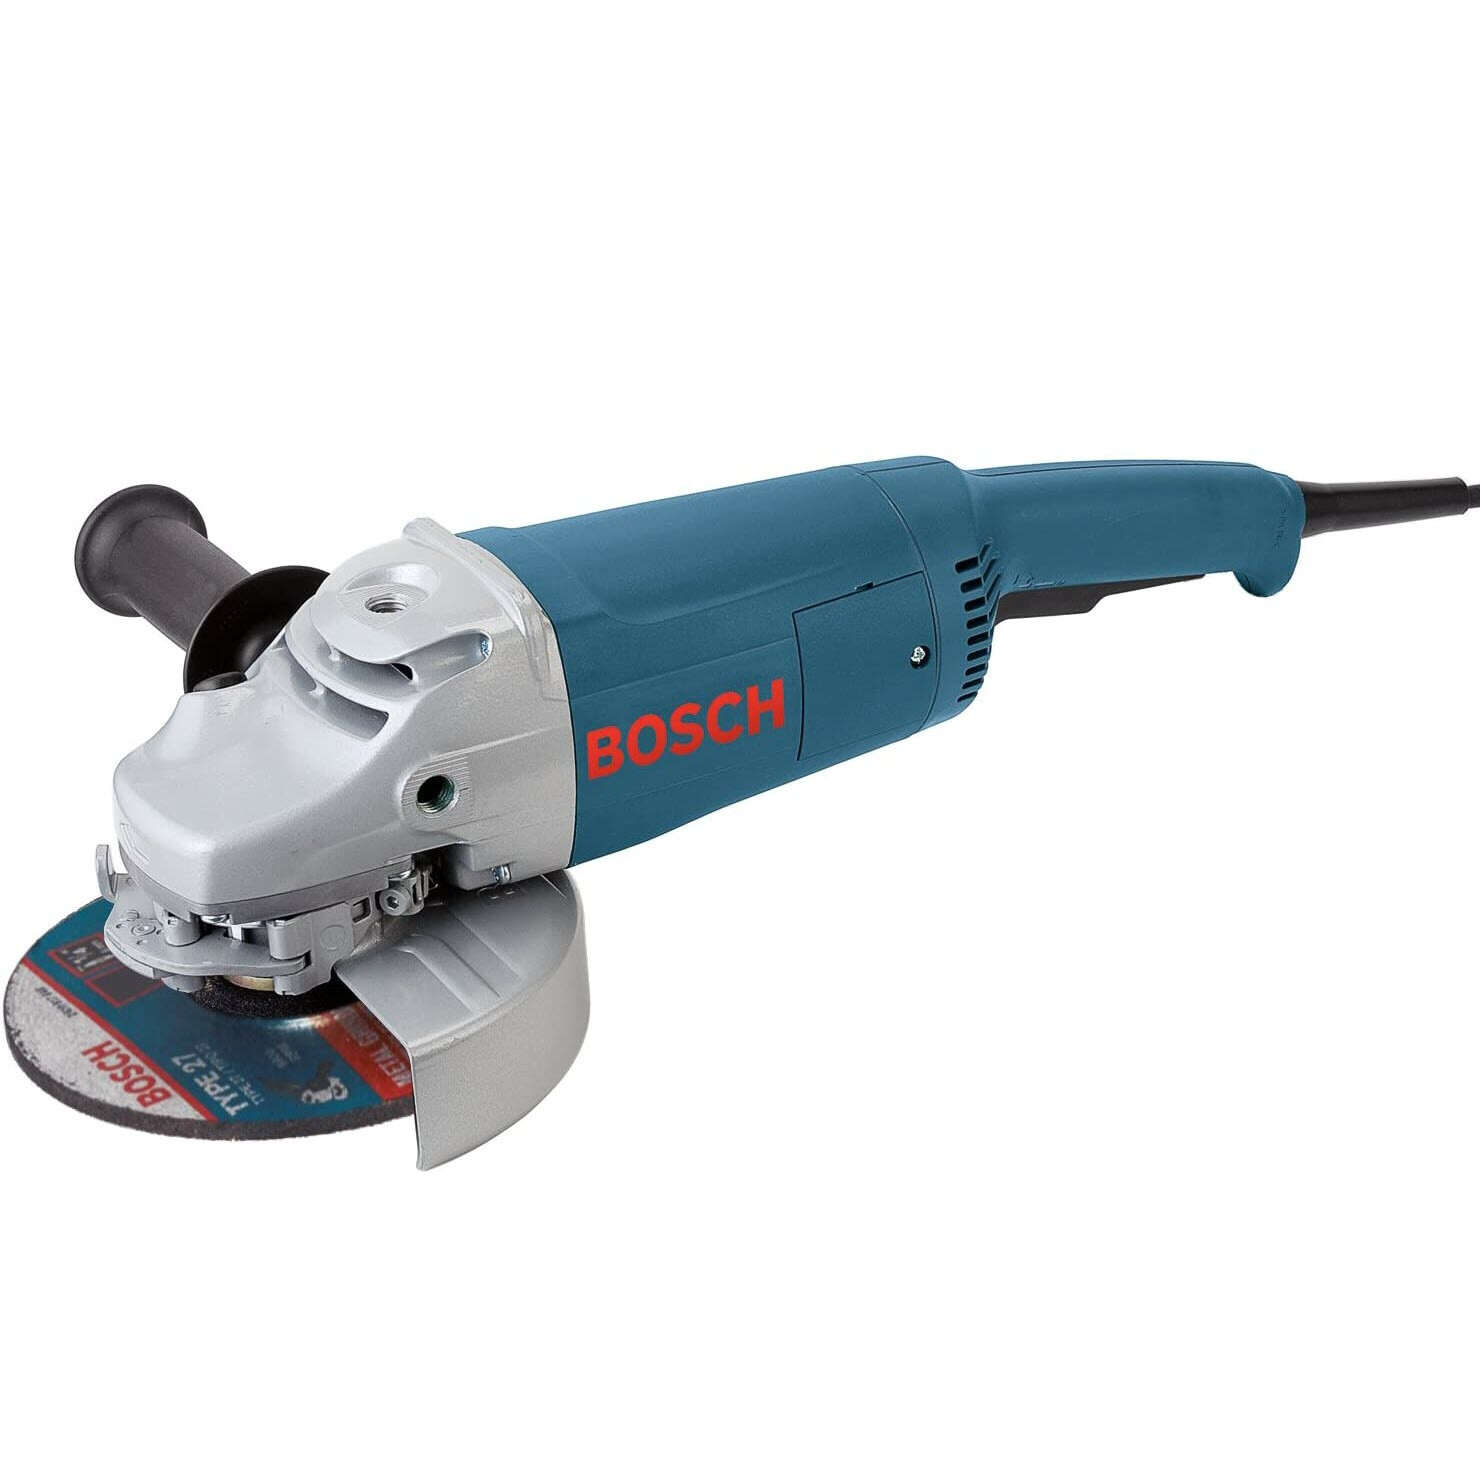 Bosch (1772-6) 7" Large Angle Grinder w/Rat Tail